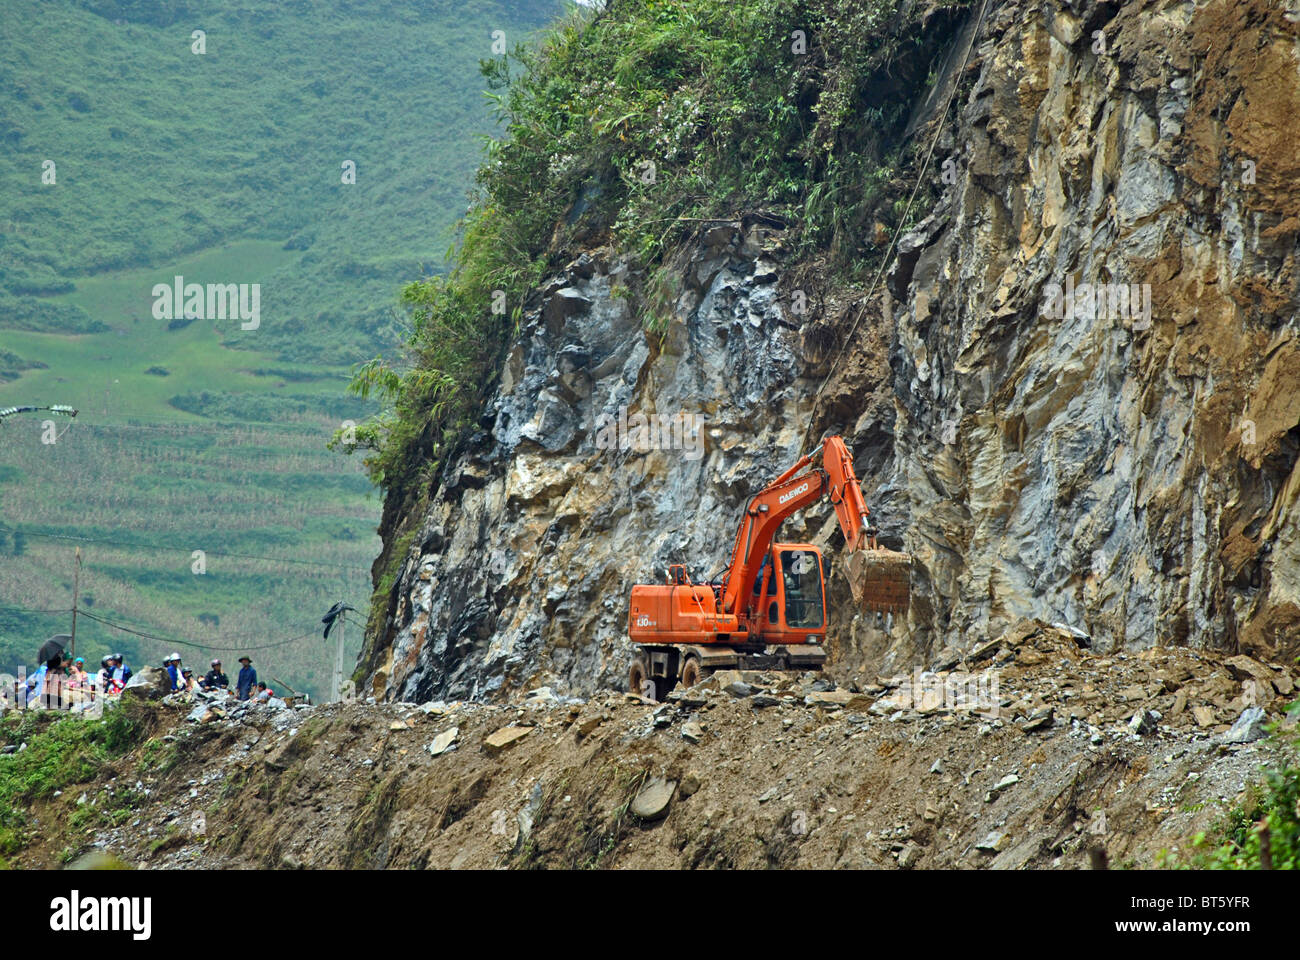 A digger clears rubble from a blocked road after landslides and rockfalls triggered by heavy rain in Sapa, Vietnam Stock Photo